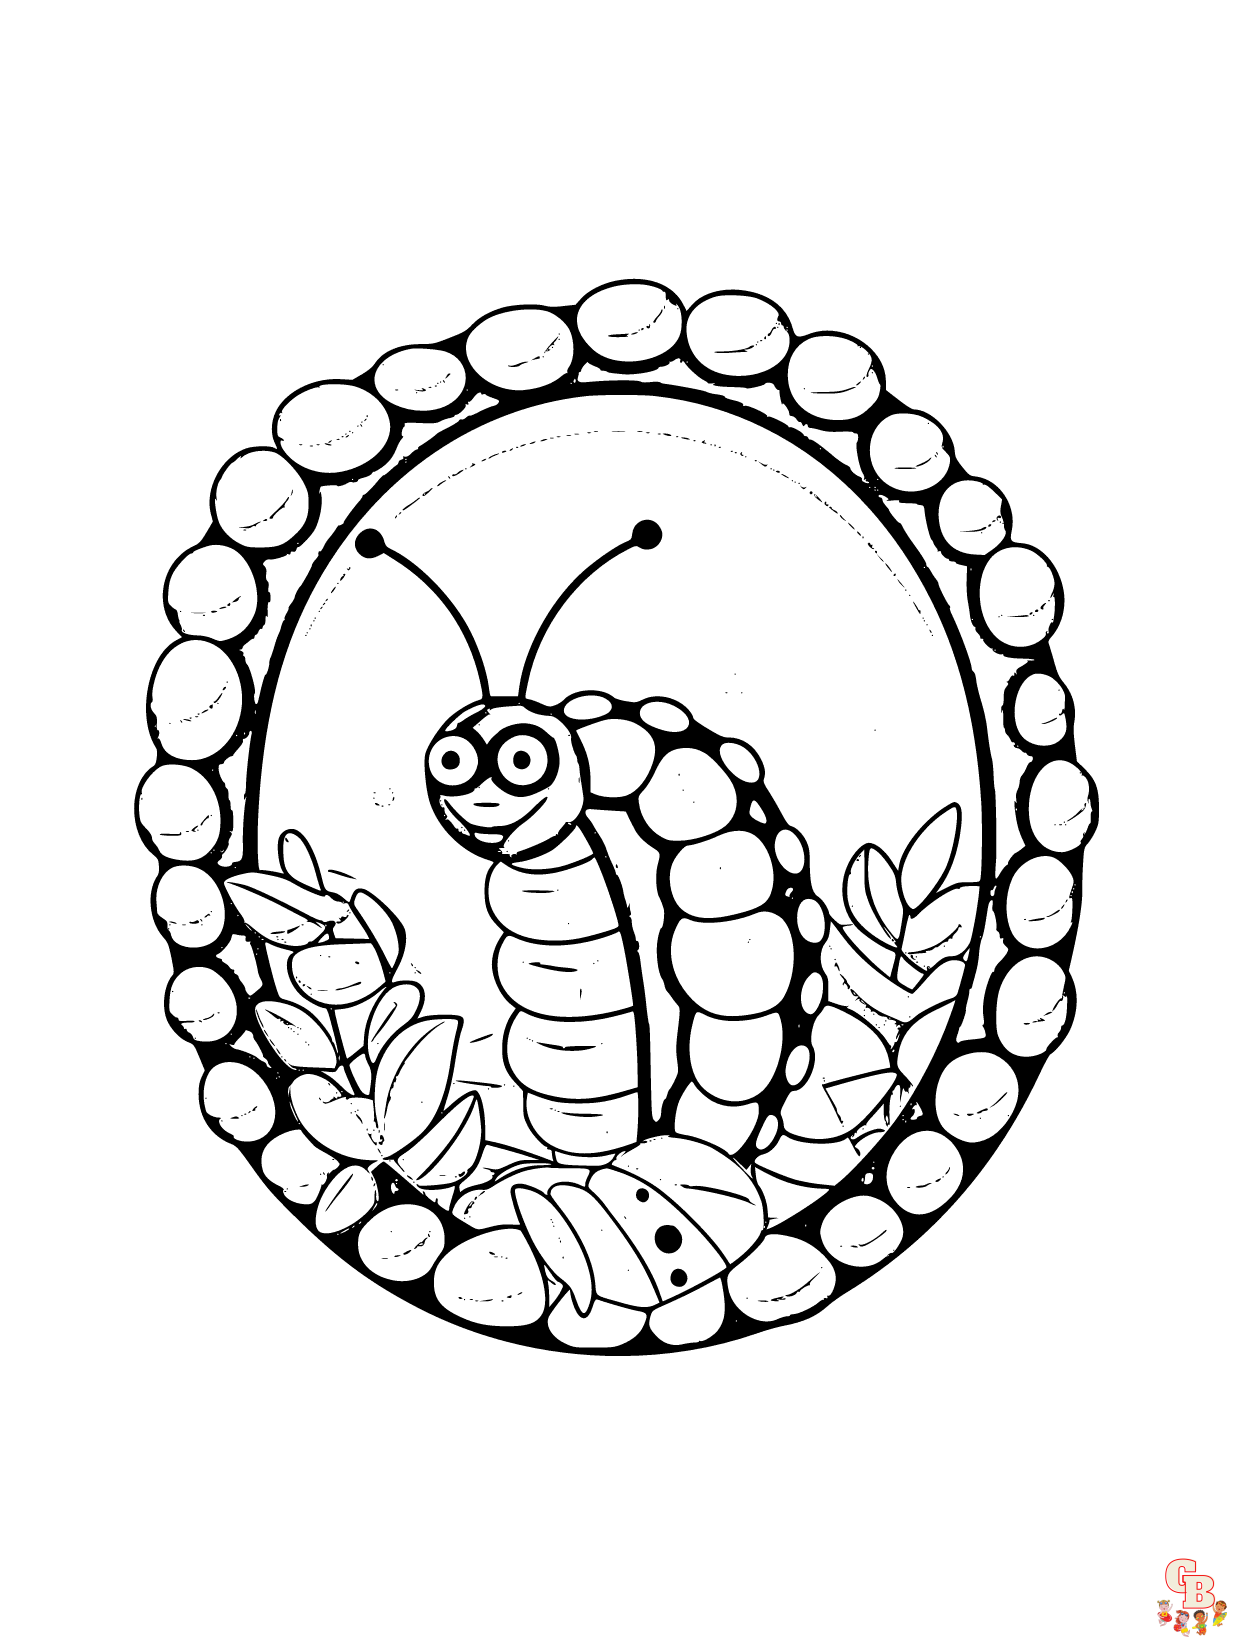 Caterpillar coloring pages to print